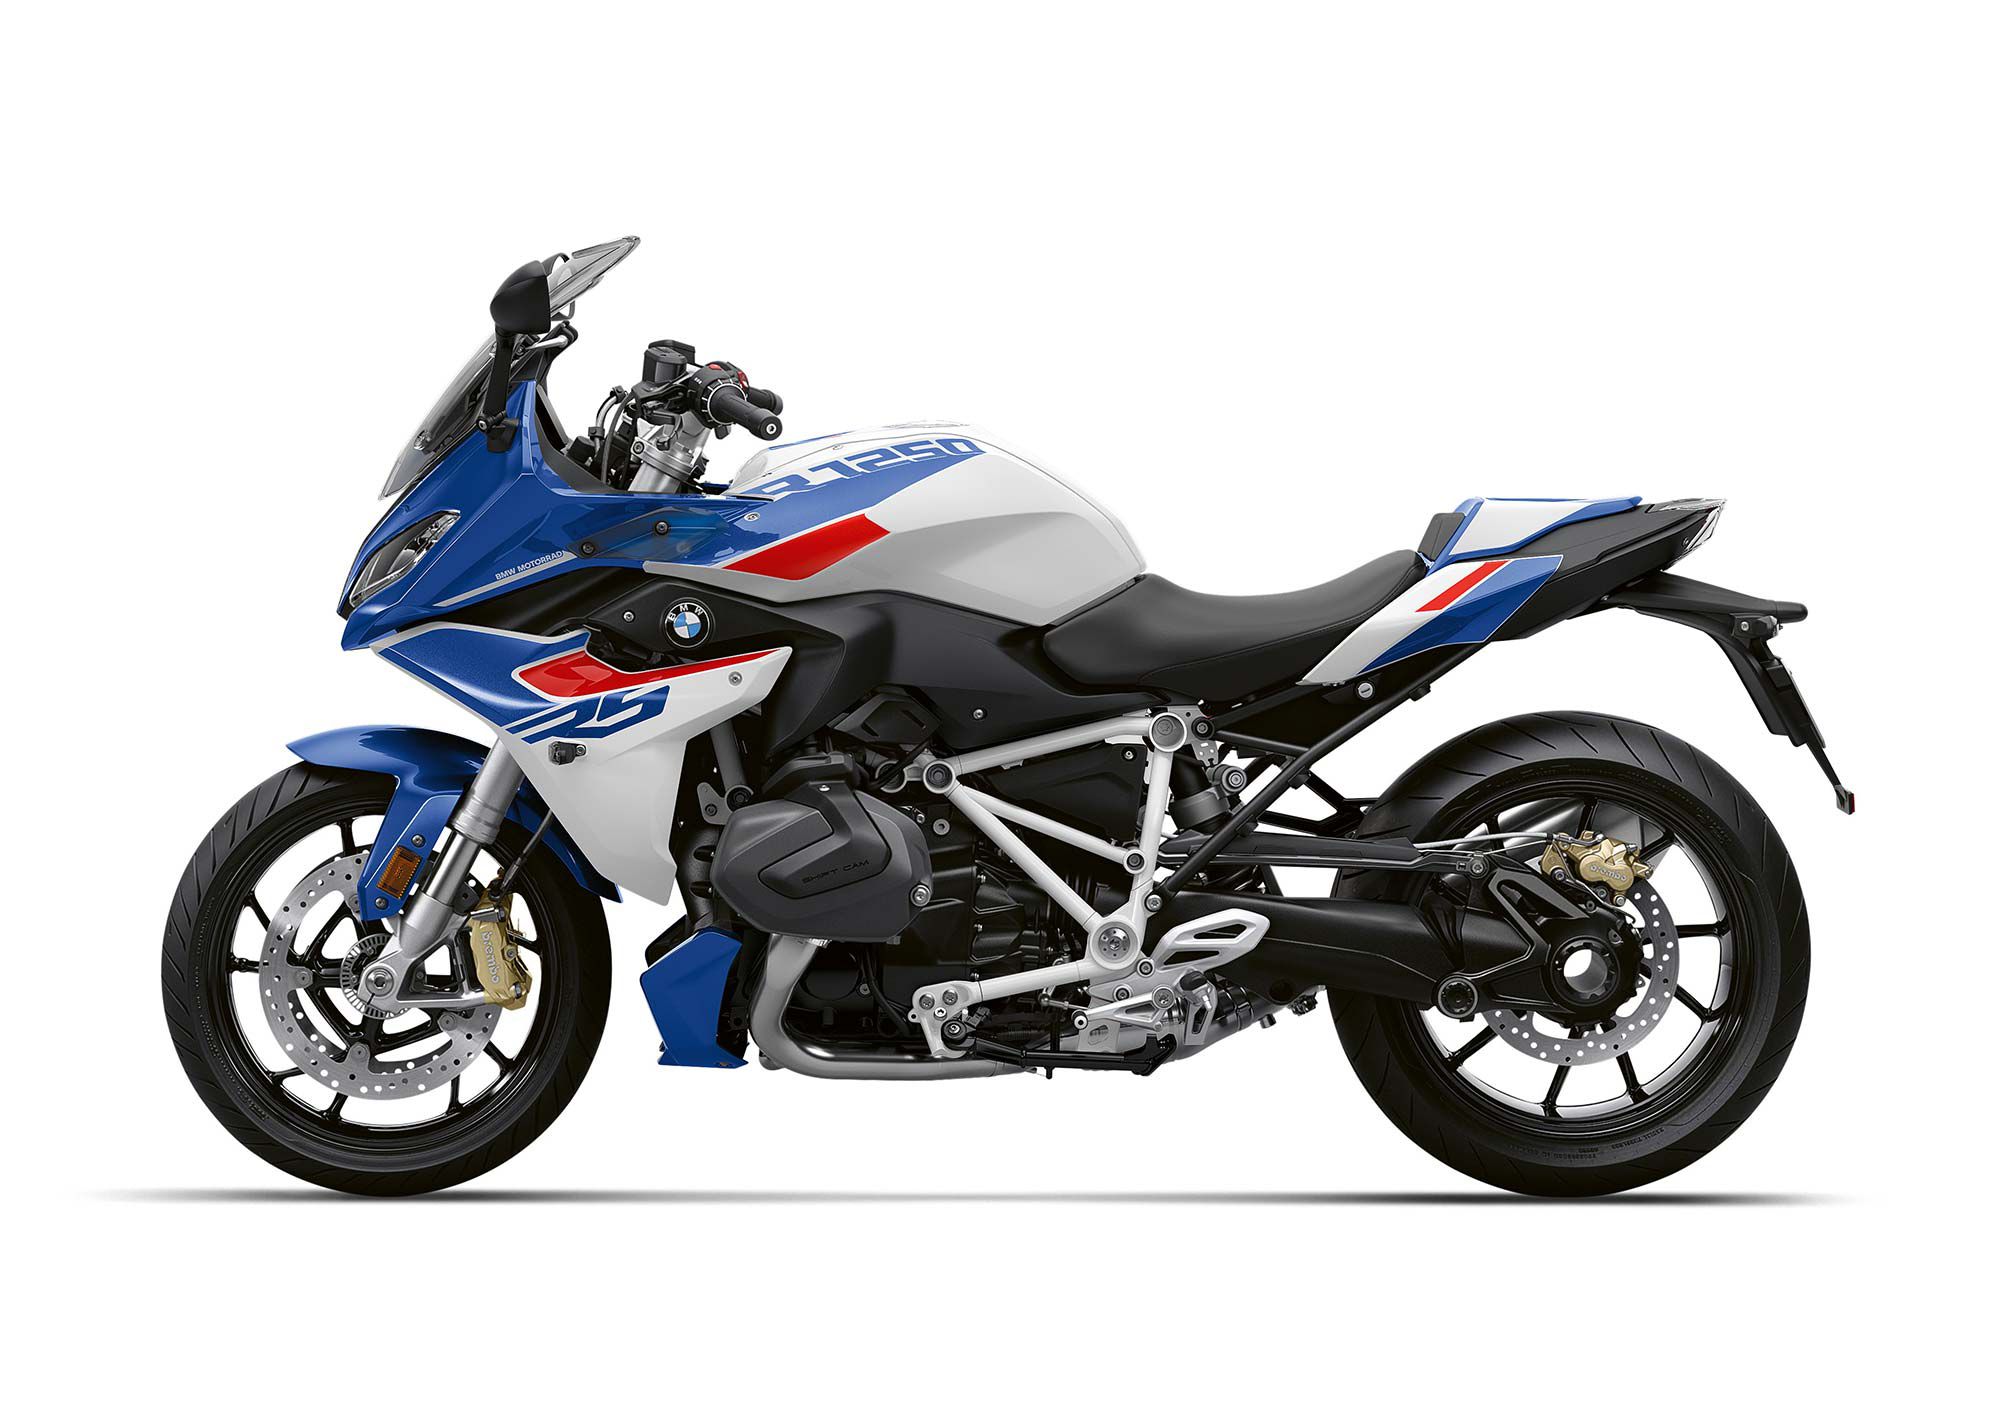 2023 BMW R 1250 RS in Light White/Racing Blue/Racing Red.